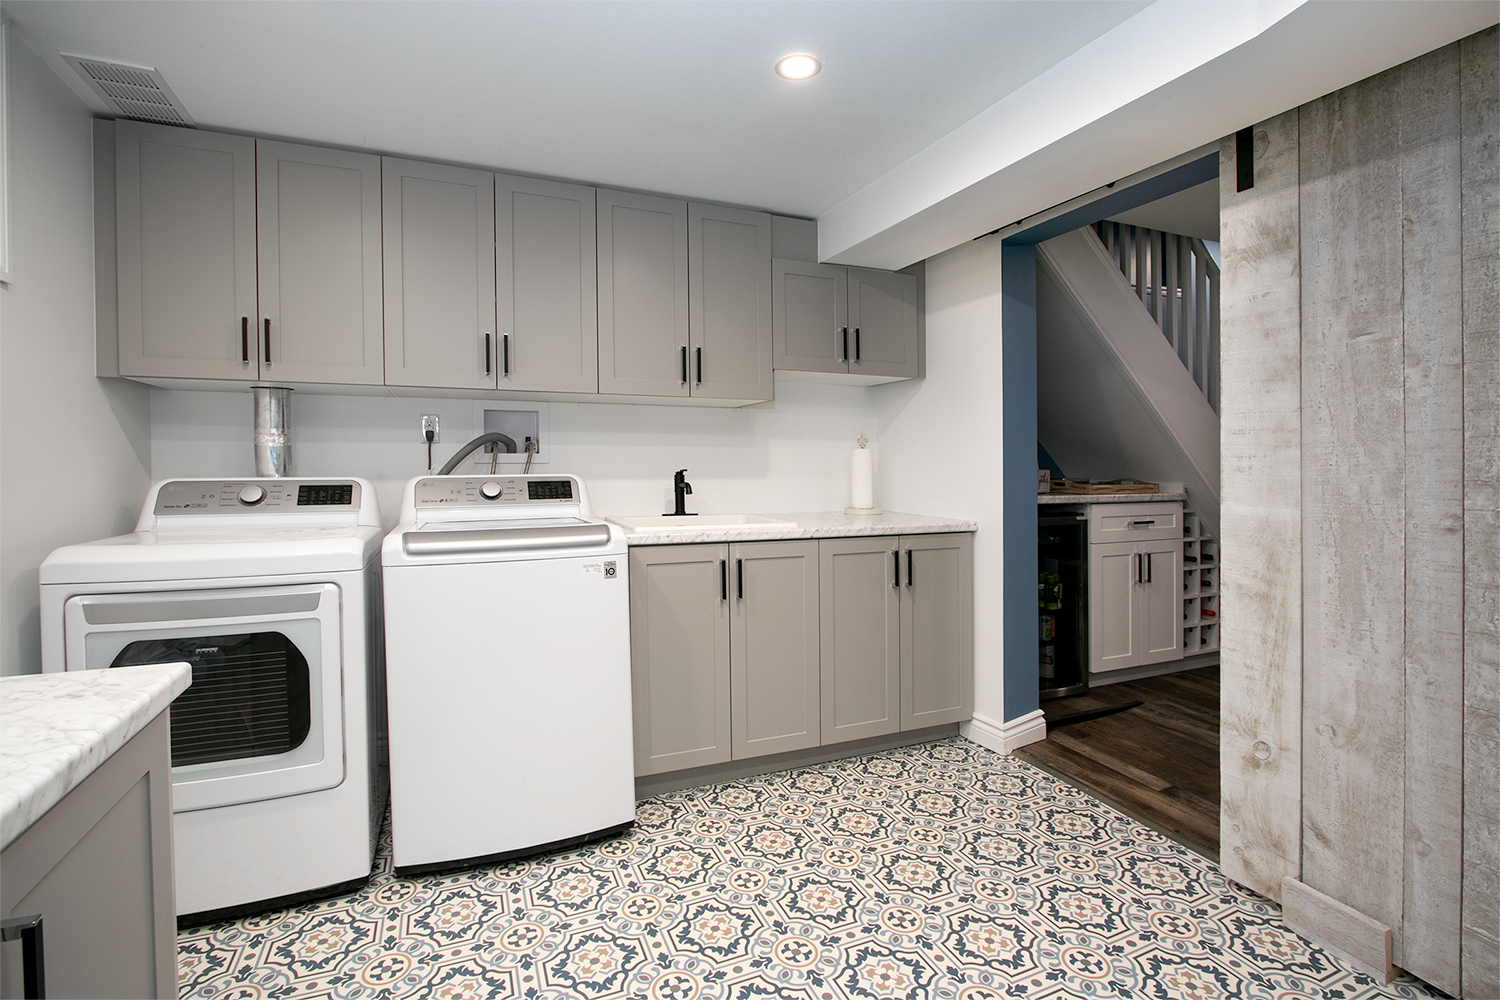 29 Laundry Room Storage Ideas for Any Kind of Space